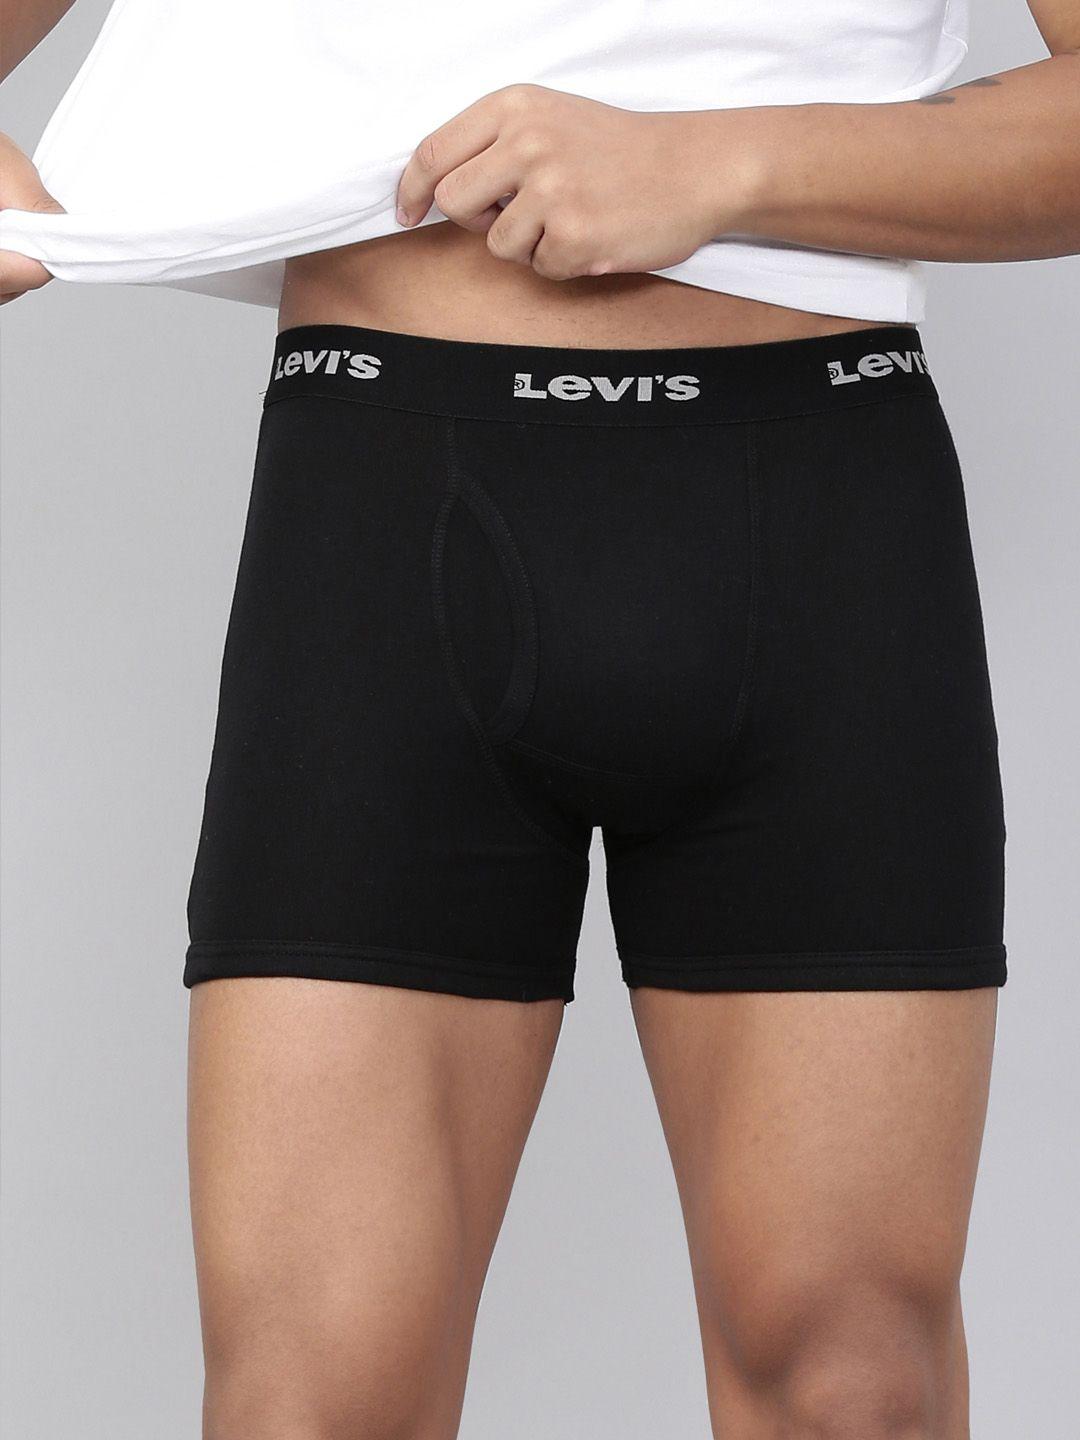 levis-smartskin-technology-cotton-trunks-with-tag-free-comfort-#001-boxer-brief